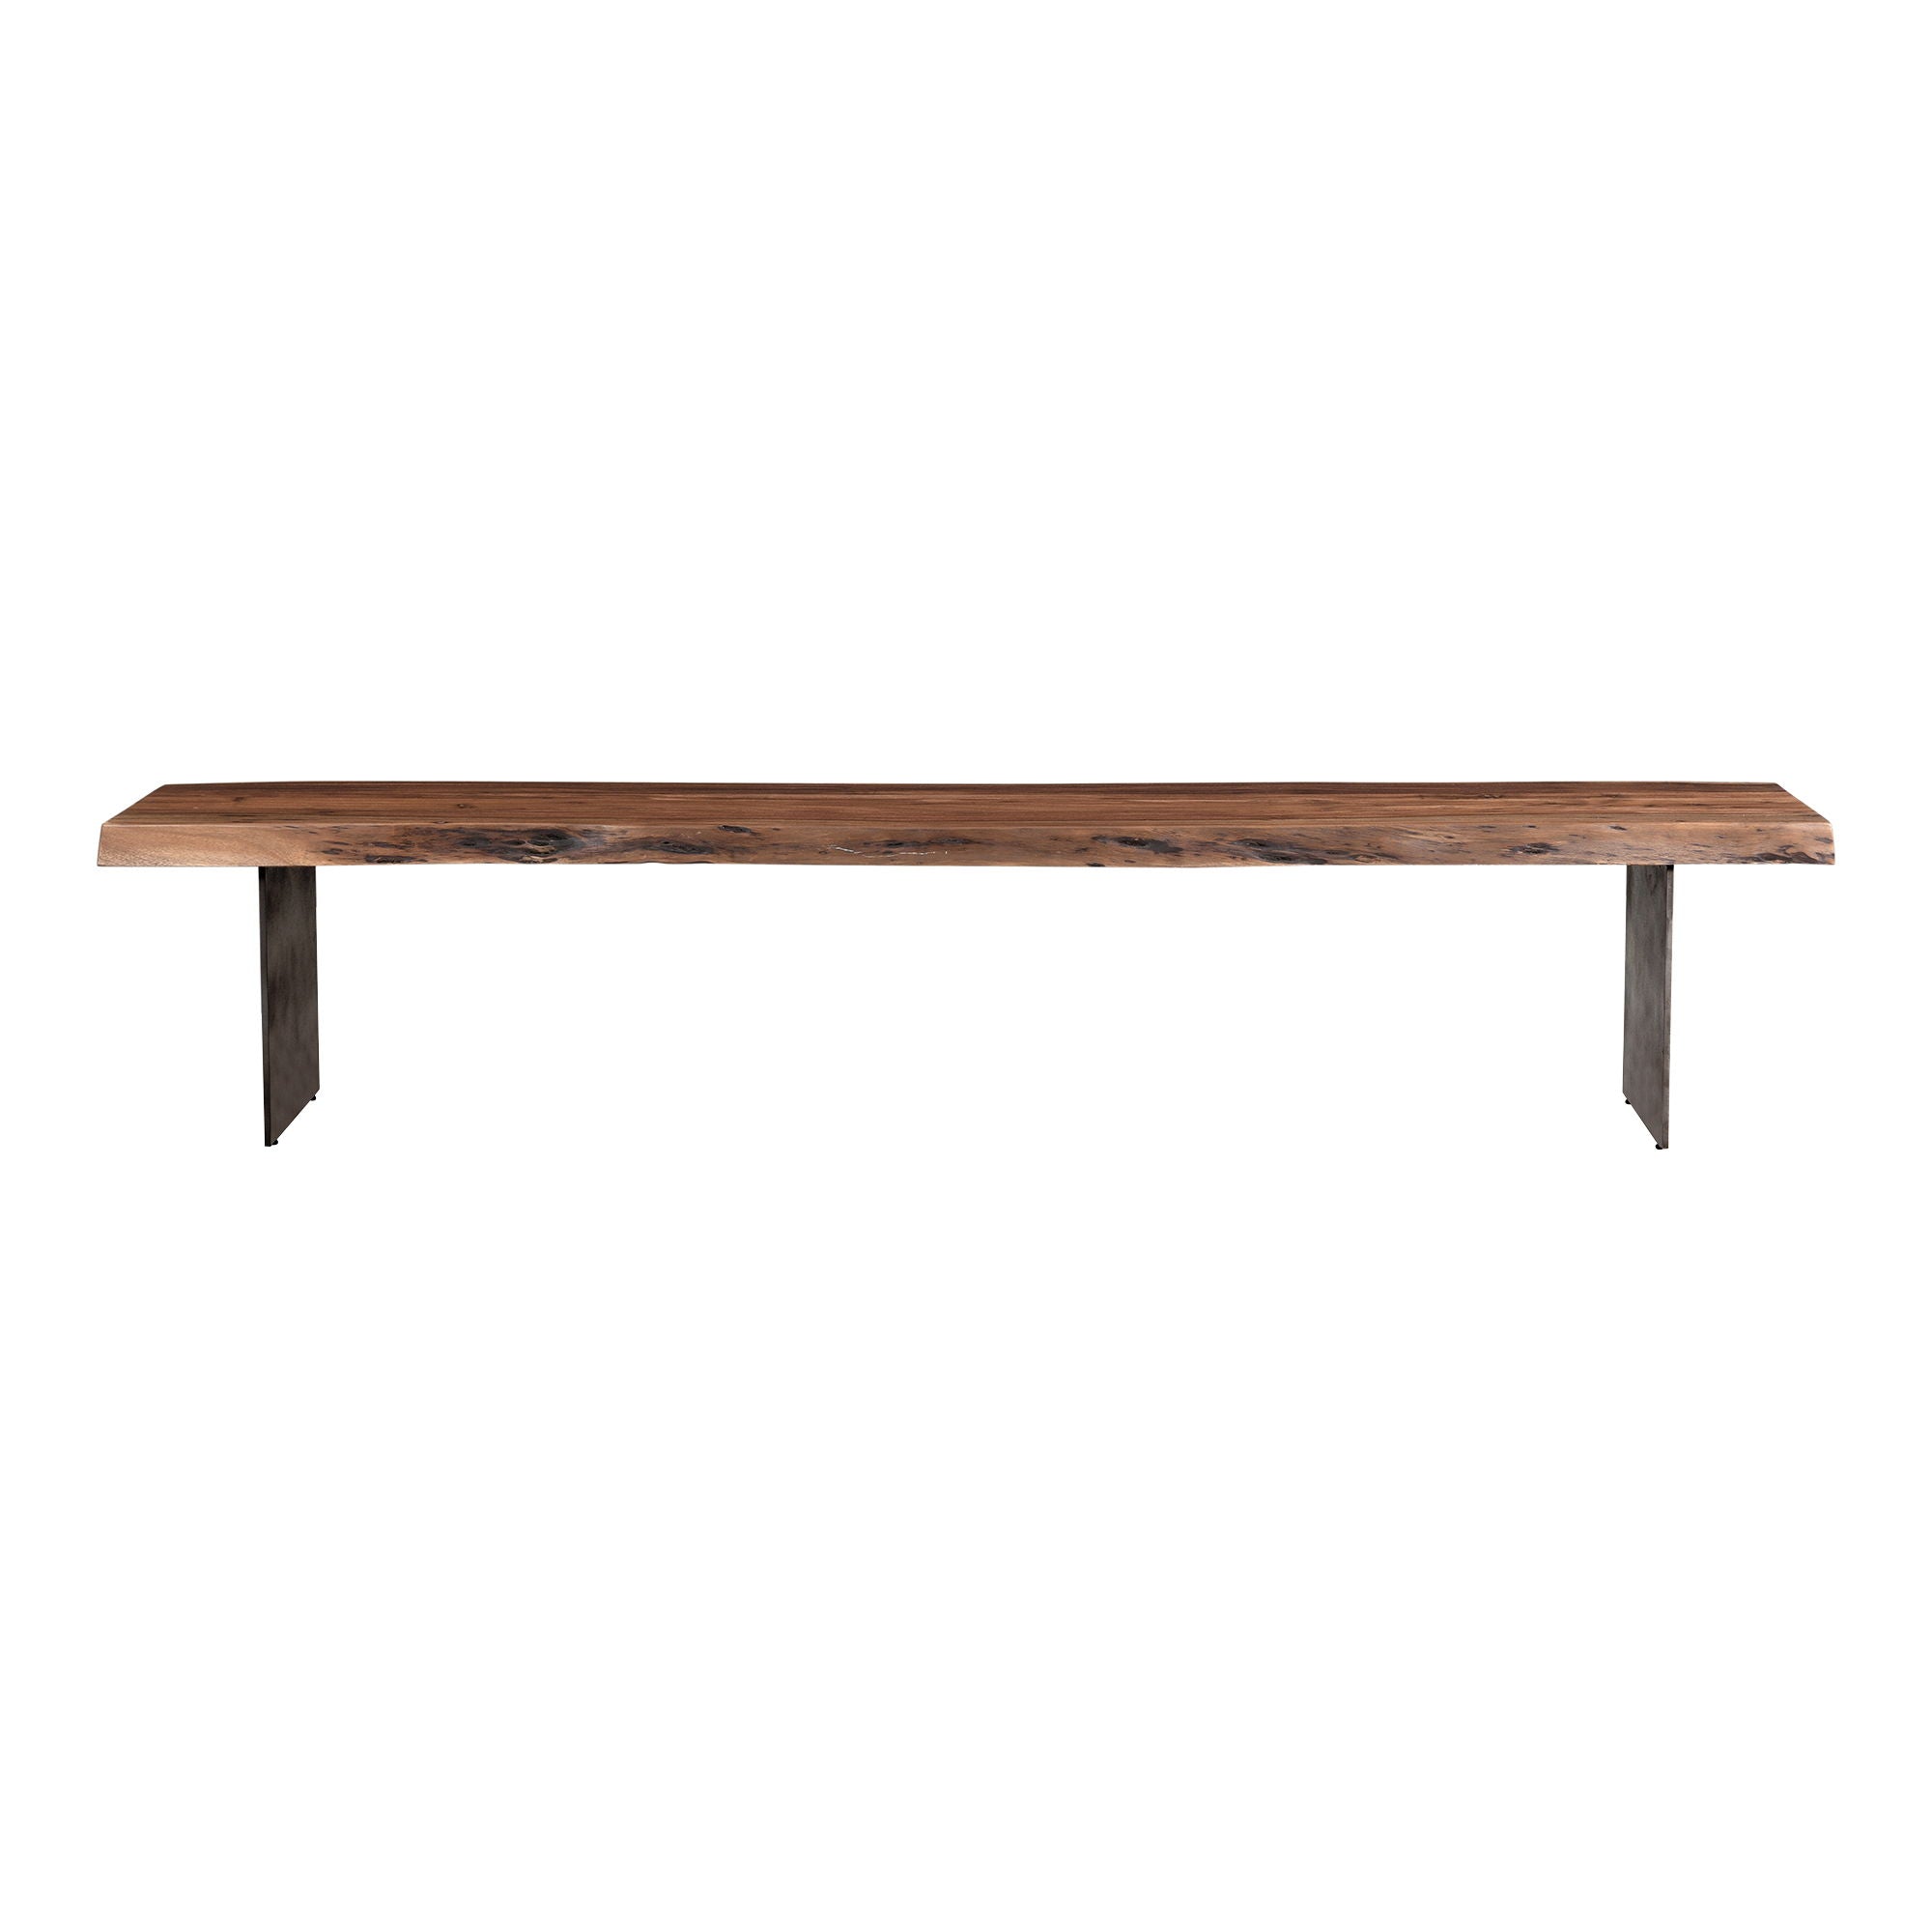 Howell - Dining Bench - Natural Stain